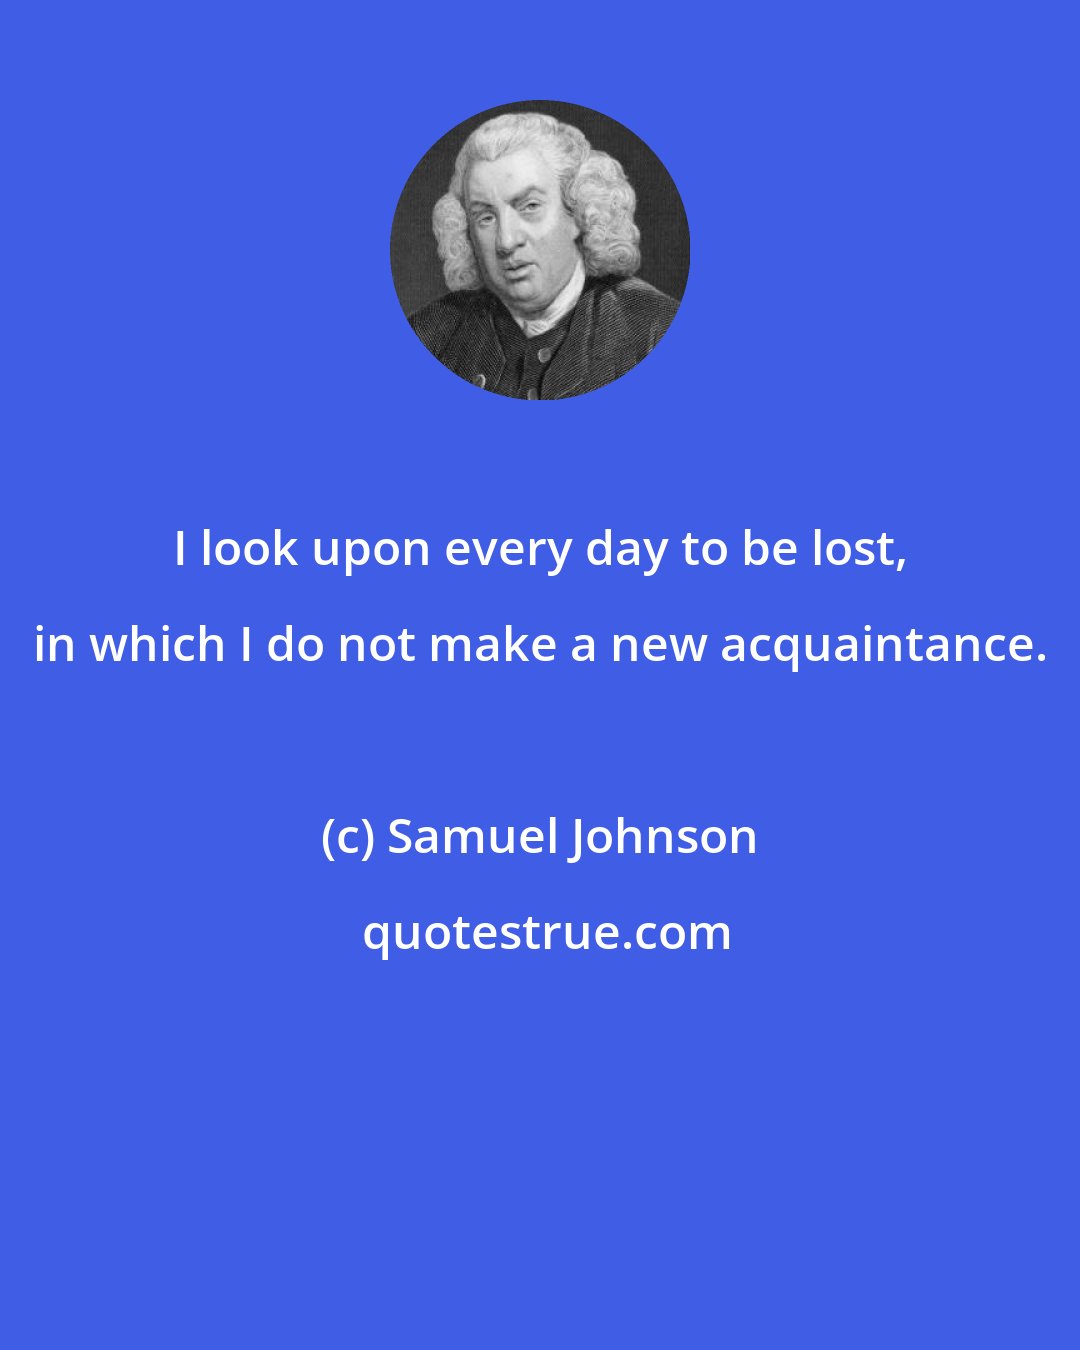 Samuel Johnson: I look upon every day to be lost, in which I do not make a new acquaintance.